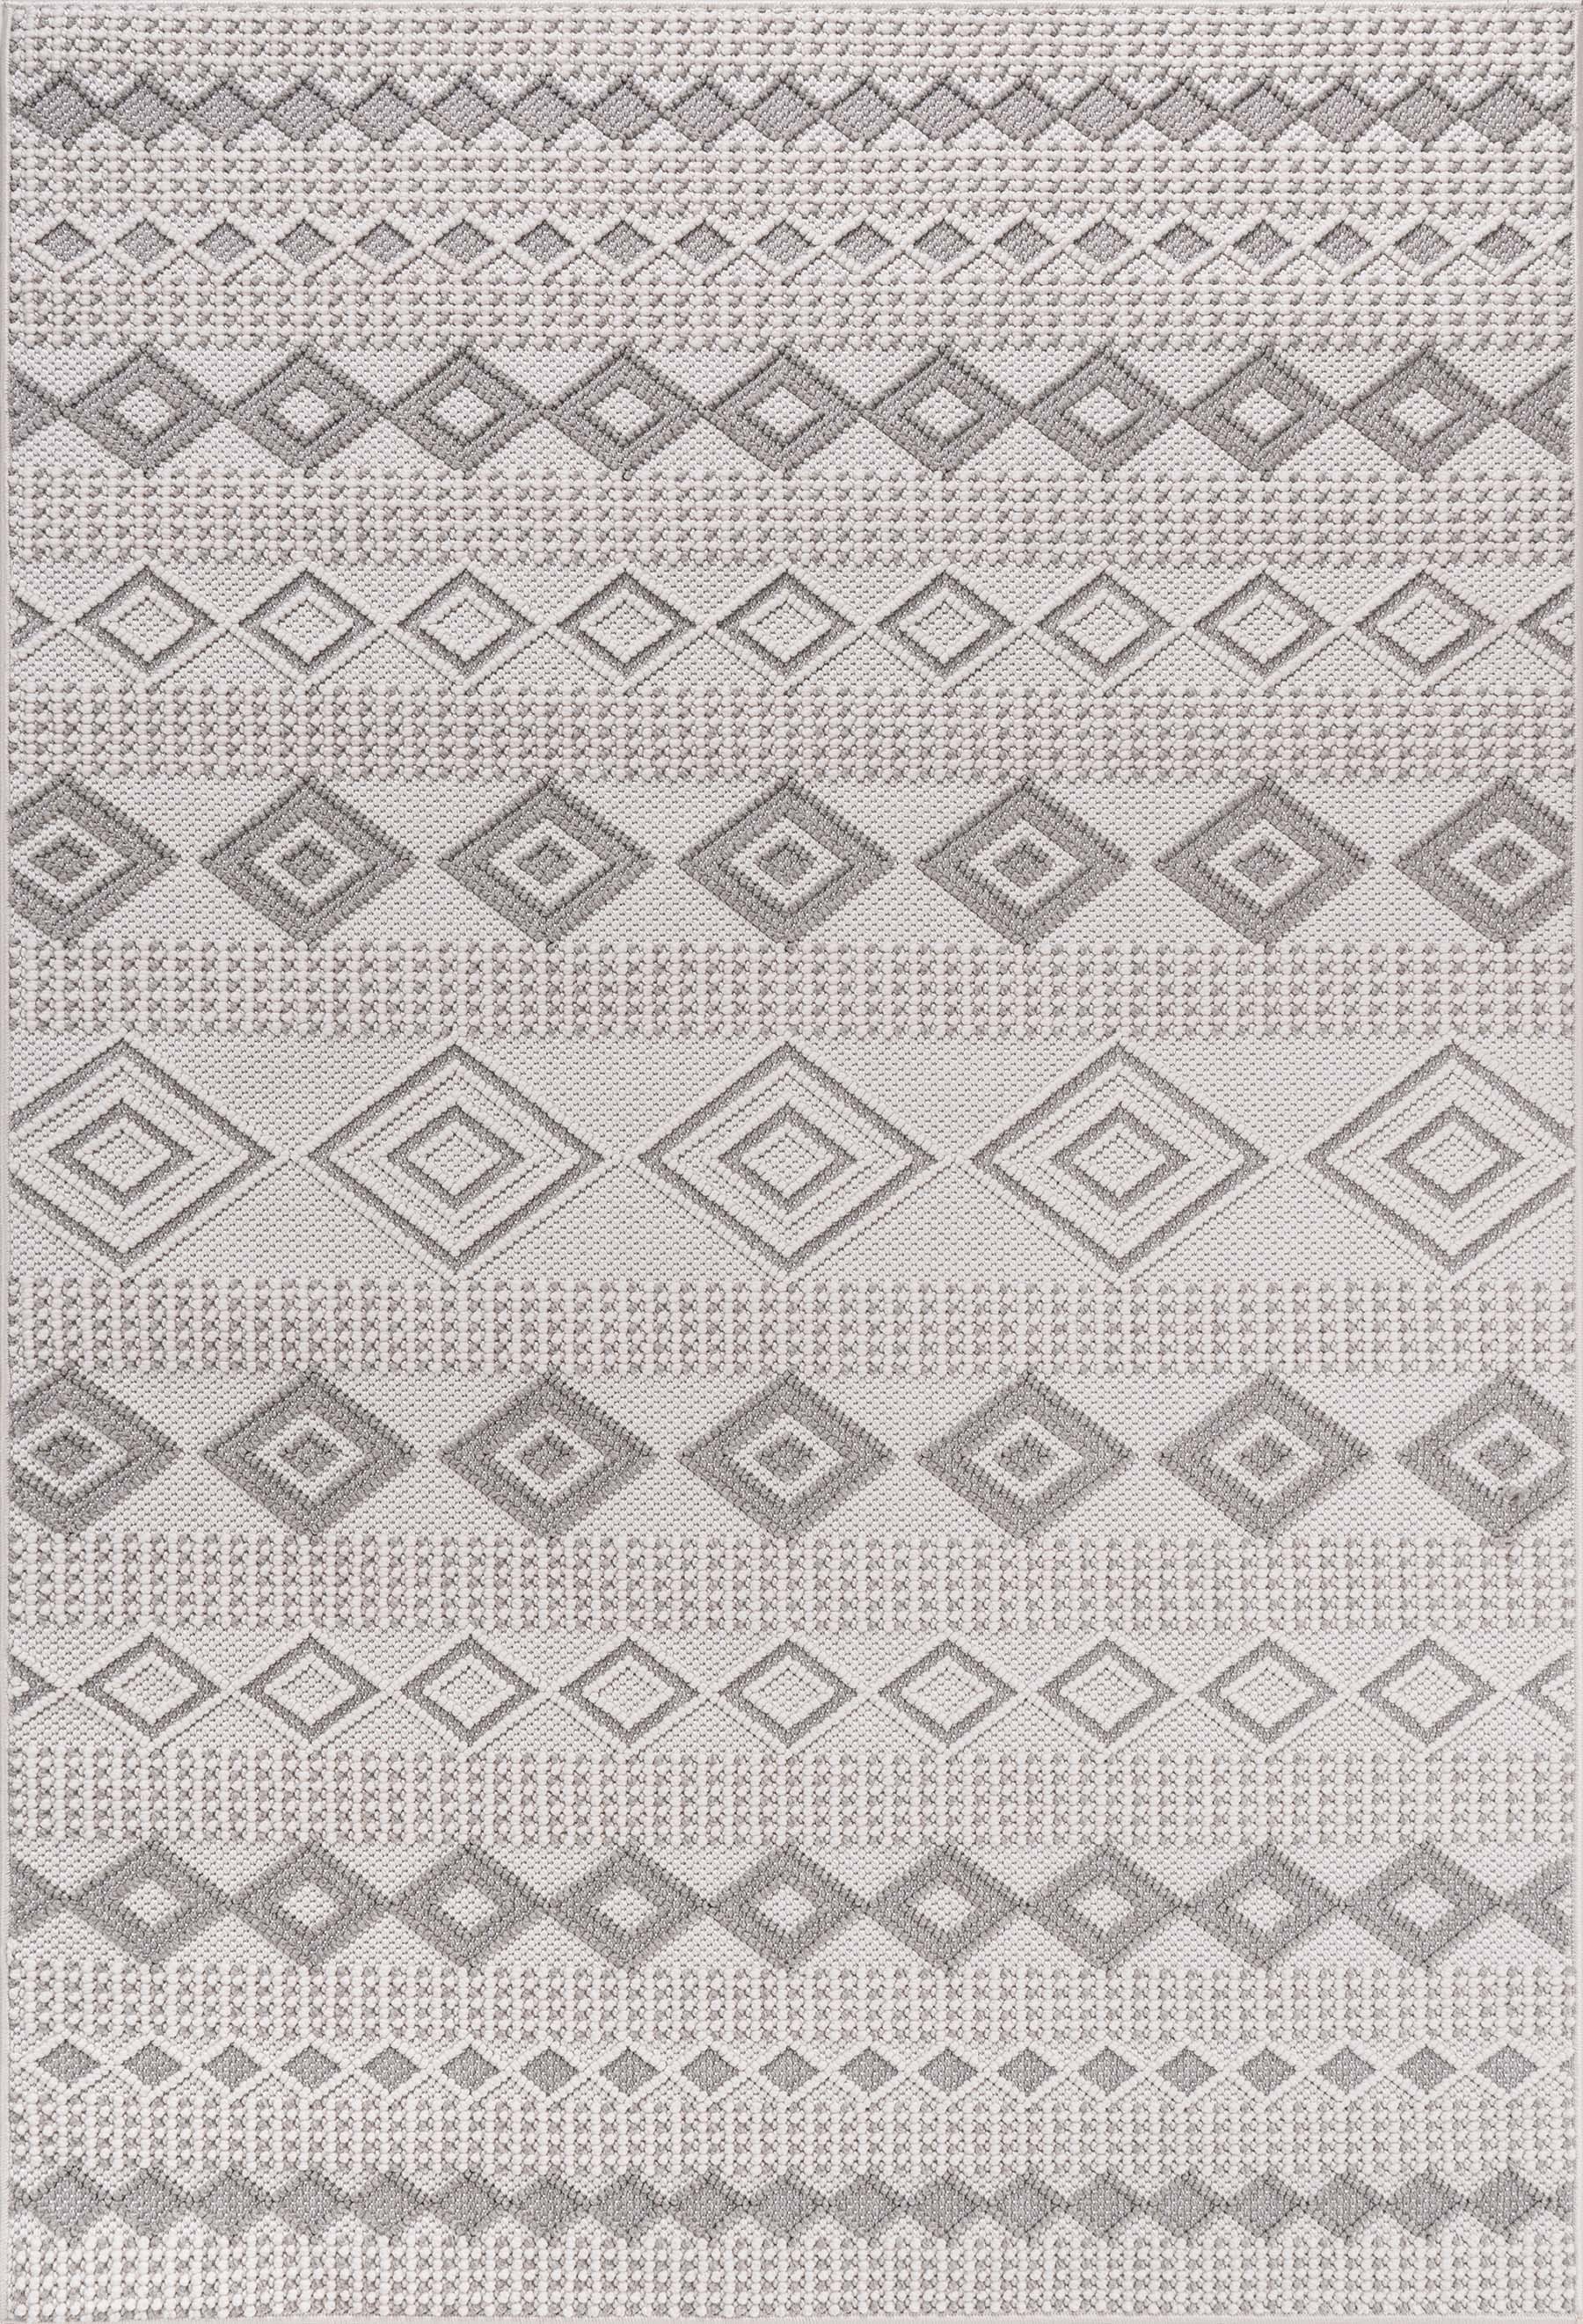 Micro Loop Area Rugs  GY8 - White / Gray